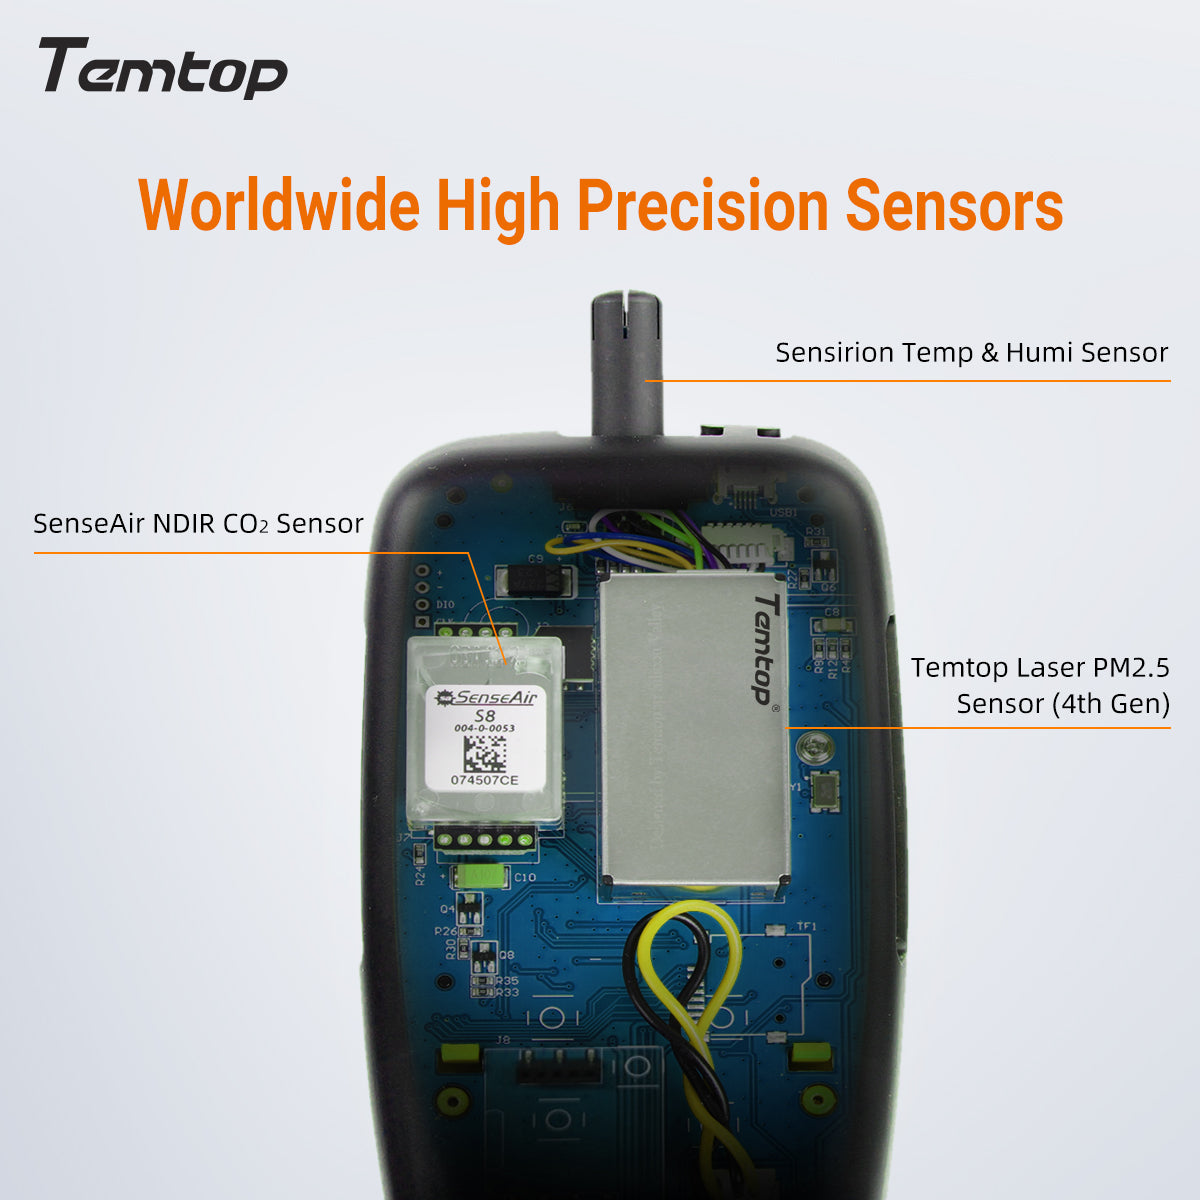 Temtop M2000C 2nd CO2 Air Quality Monitor for CO2 PM2.5 PM10 Particles, Temperature & Humidity Display, Data Export